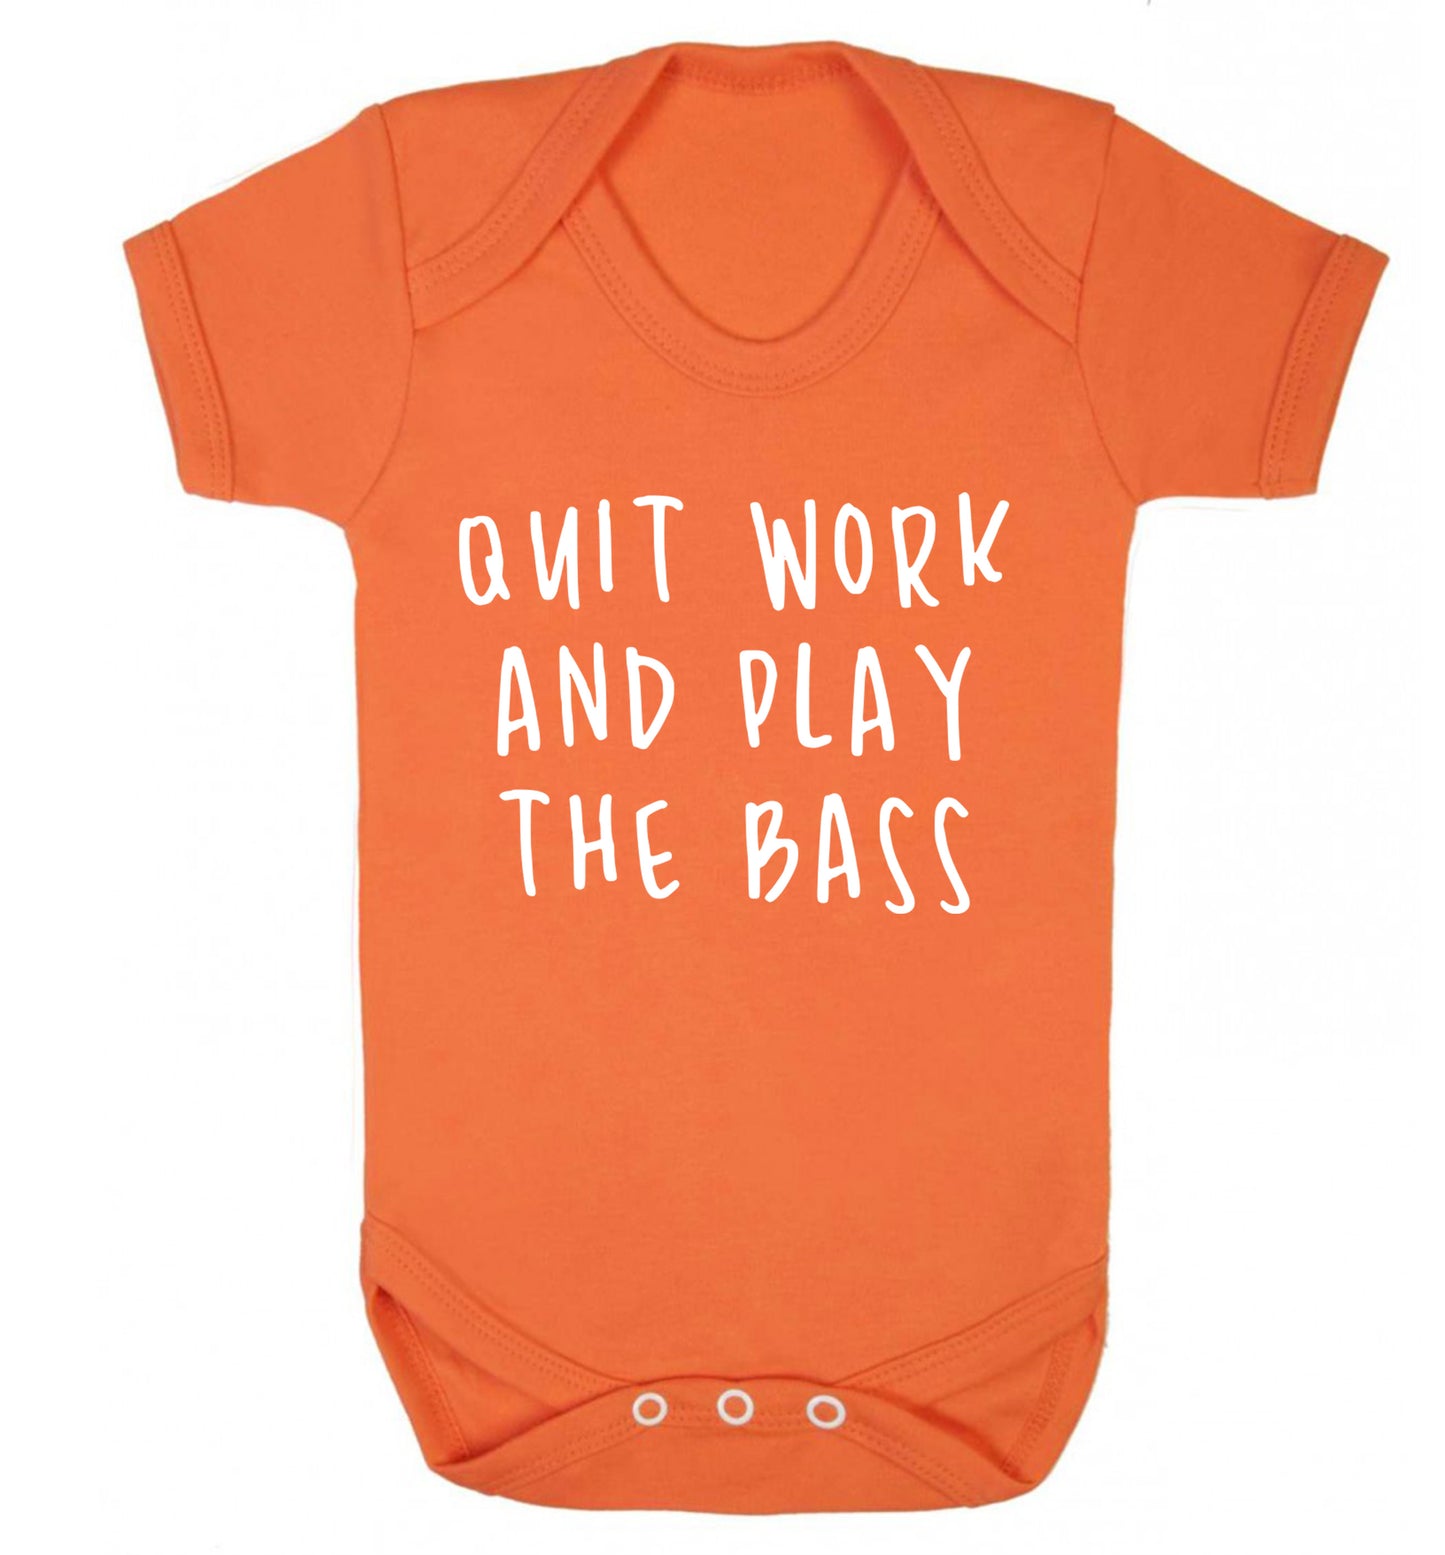 Quit work and play the bass Baby Vest orange 18-24 months